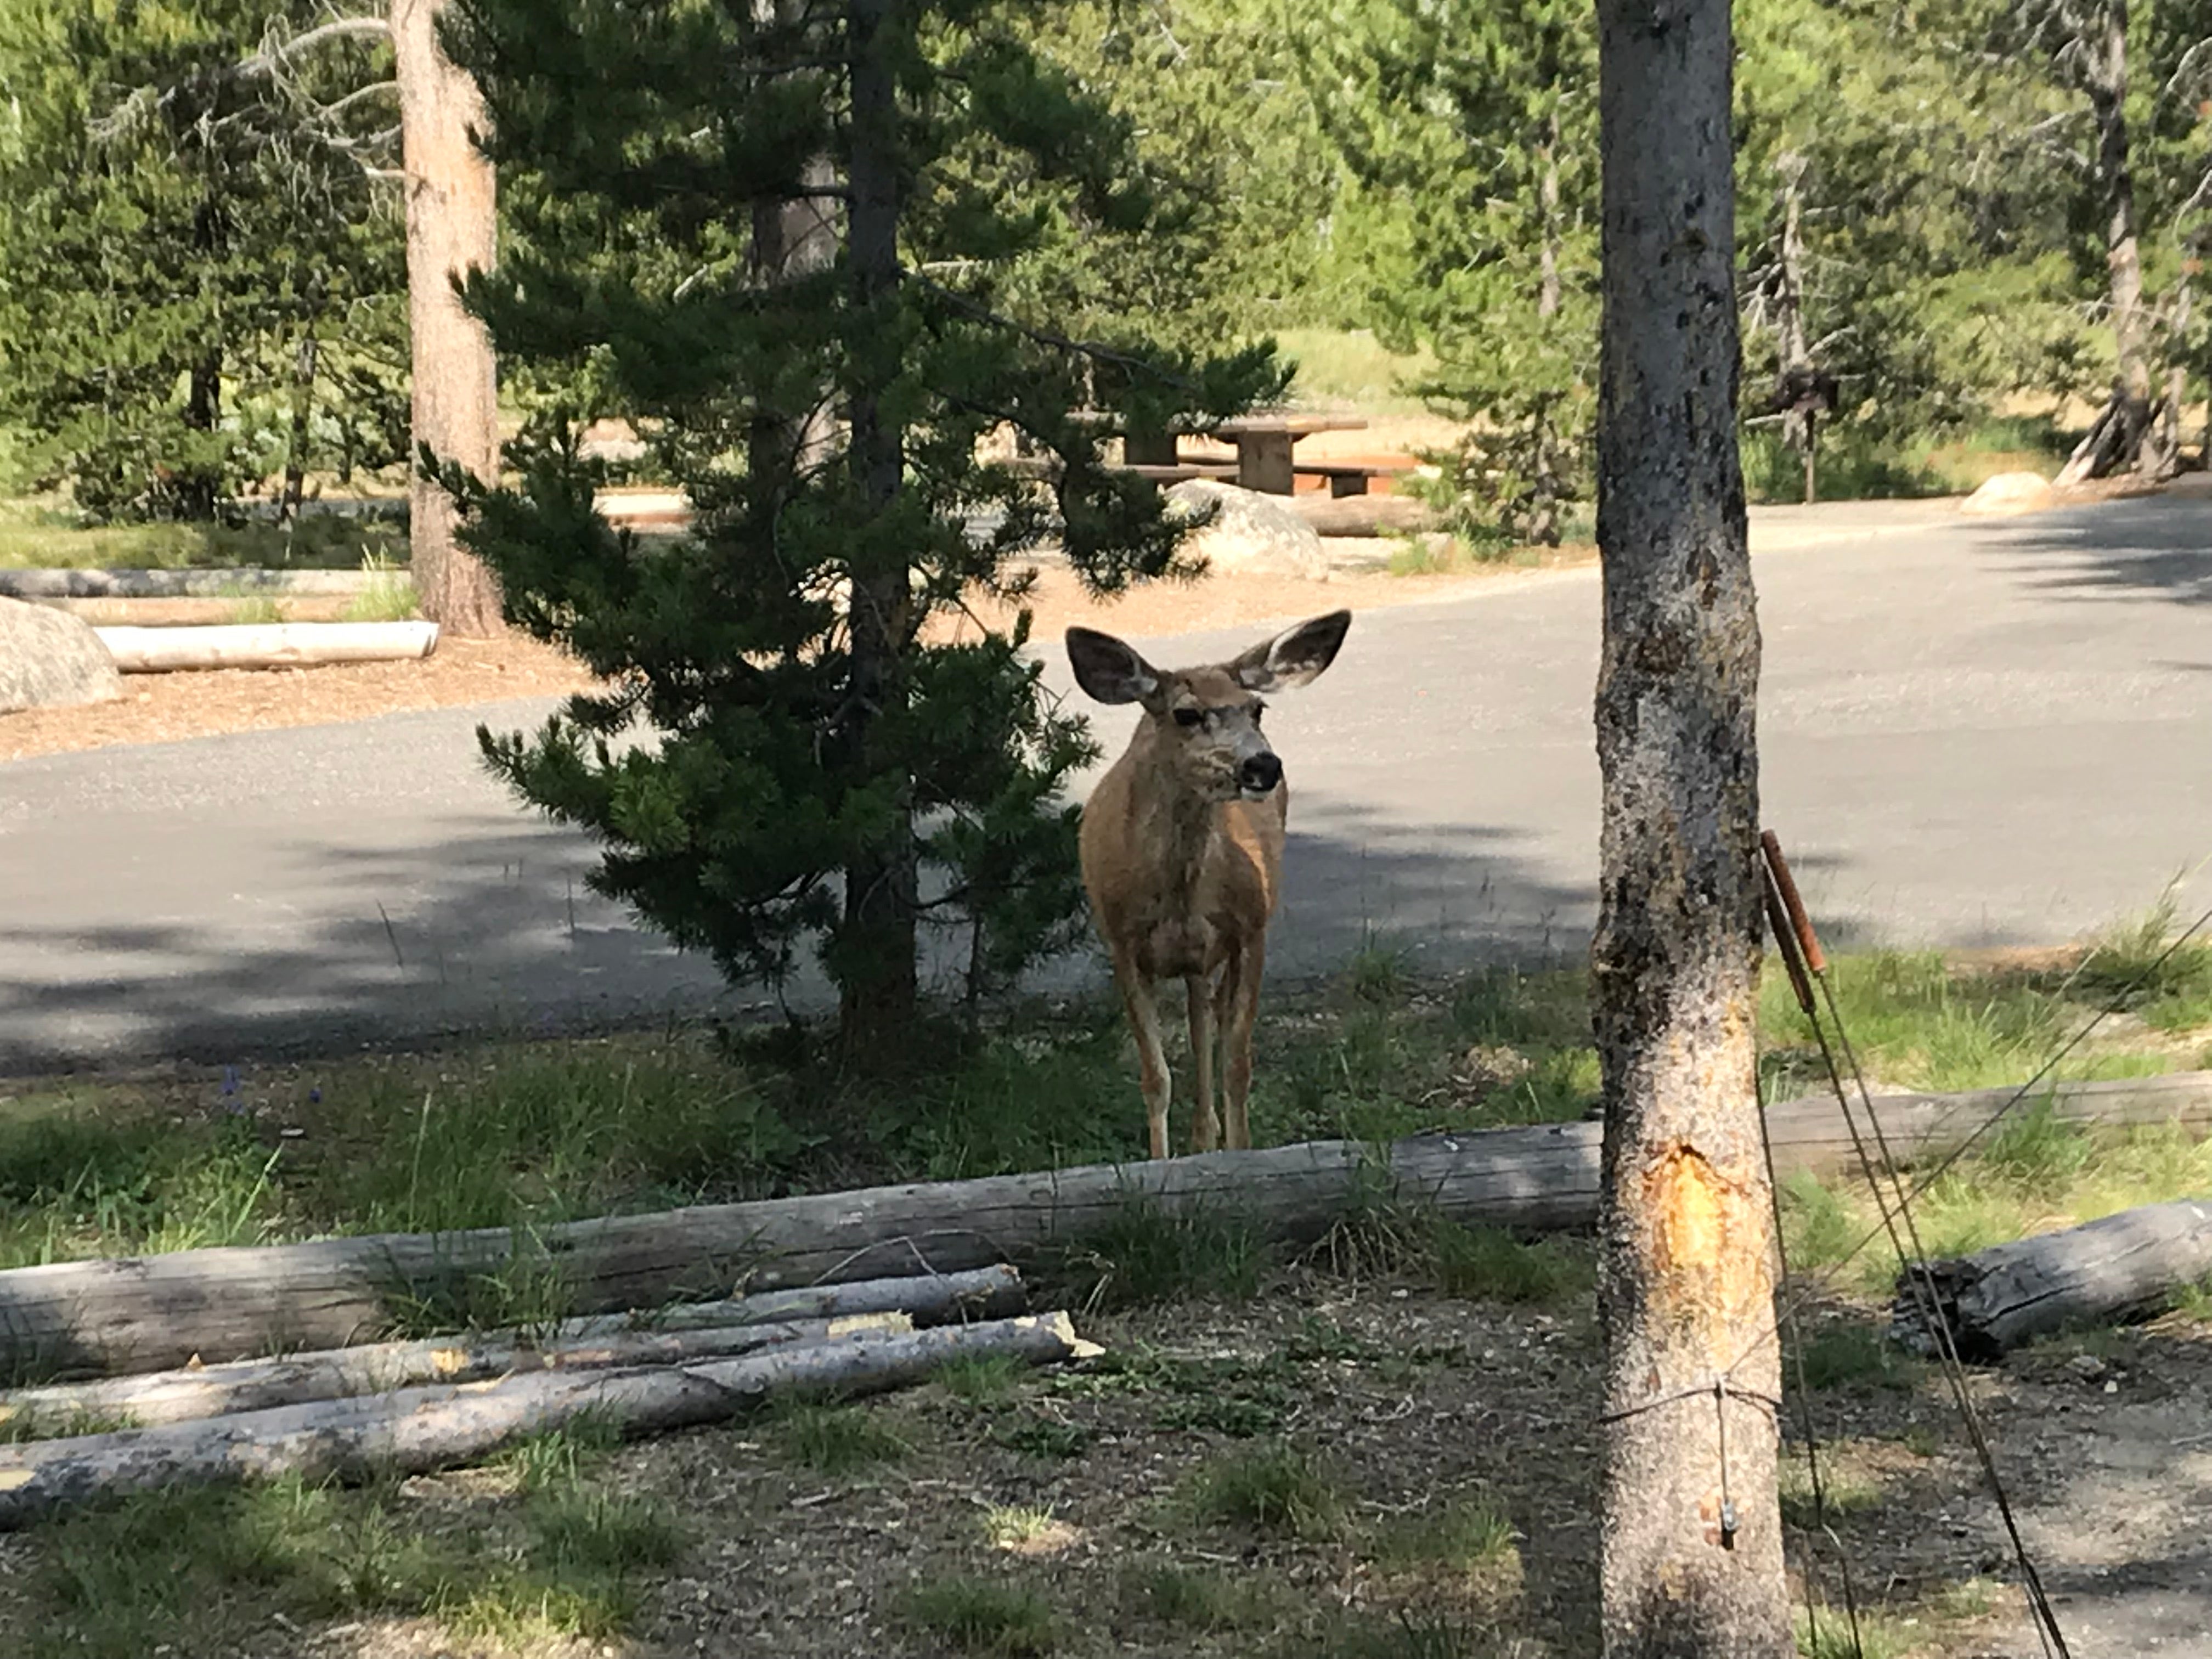 Visitor to camp